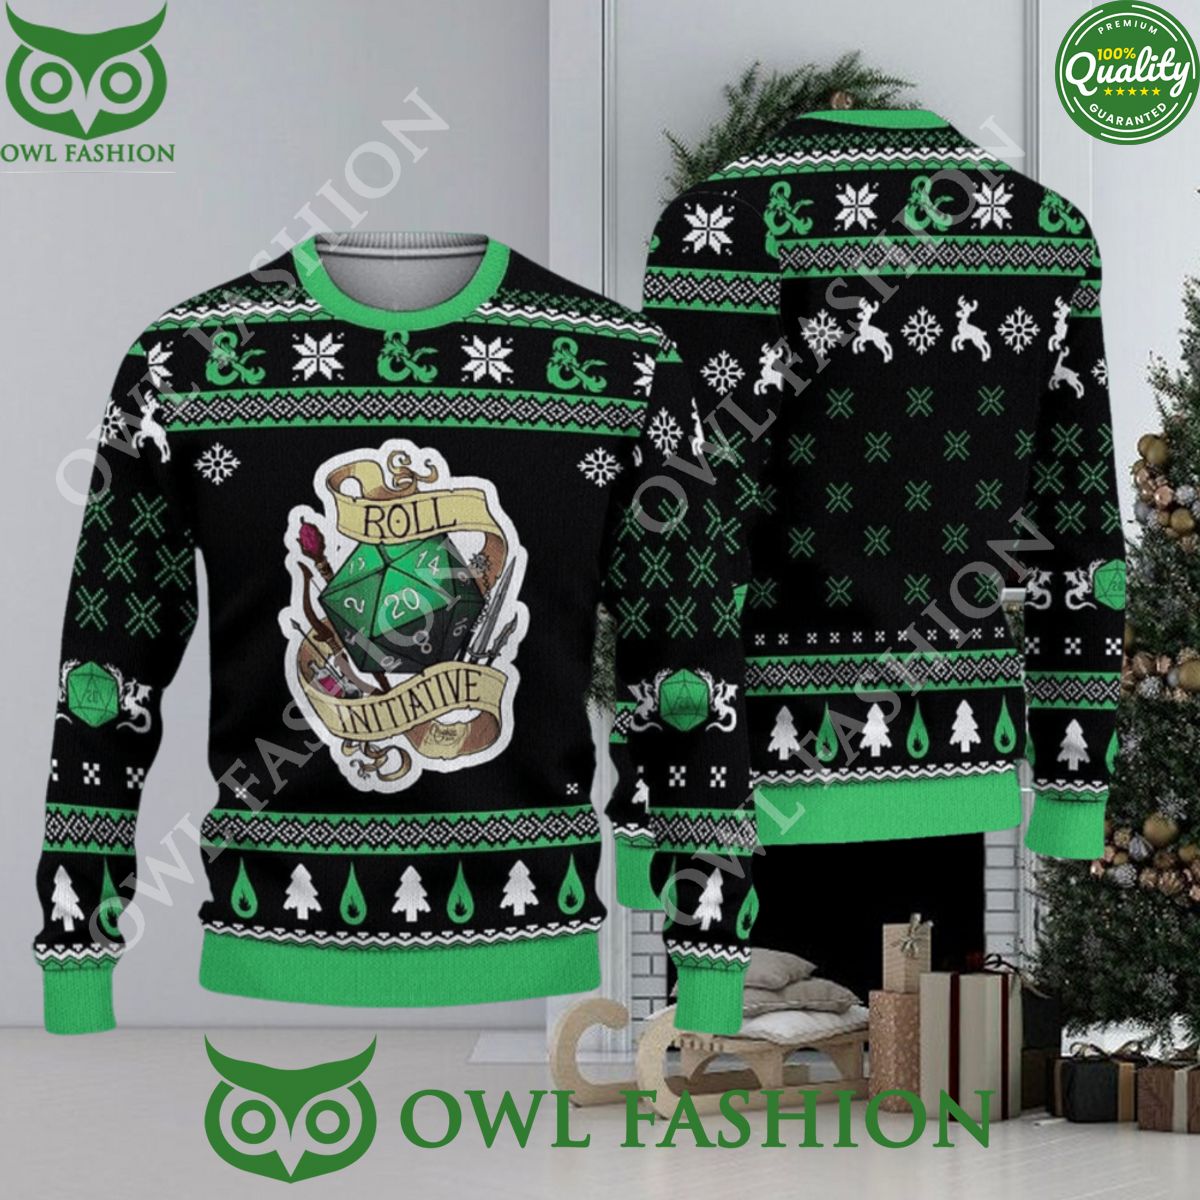 dnd classes dungeons and dragons macth ugly sweater jumper 1 A0t6v.jpg